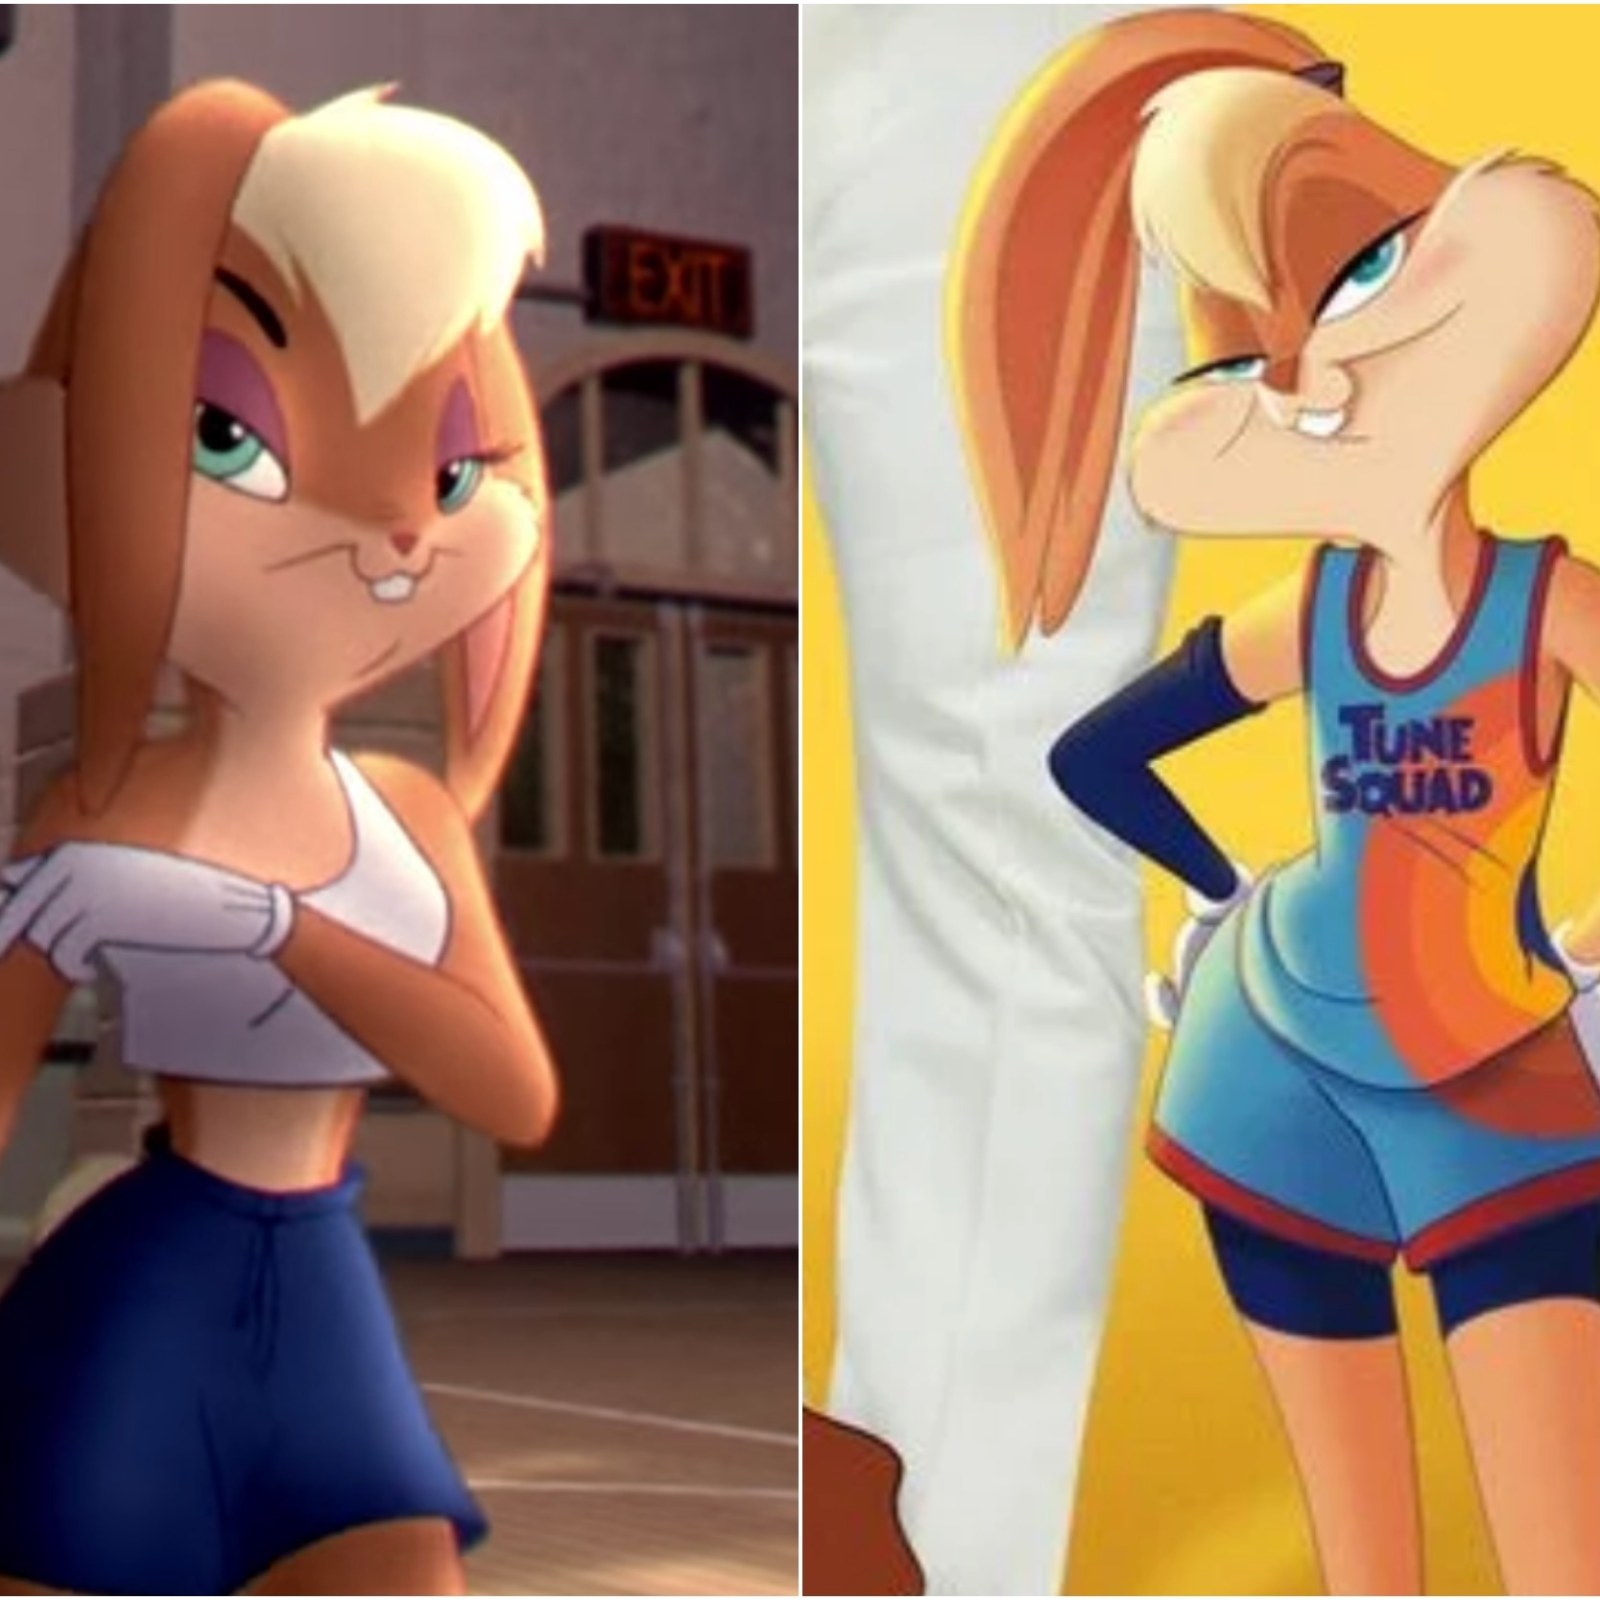 Lola Bunny 'Space Jam' Redesign Controversy: New Art Divides Fans